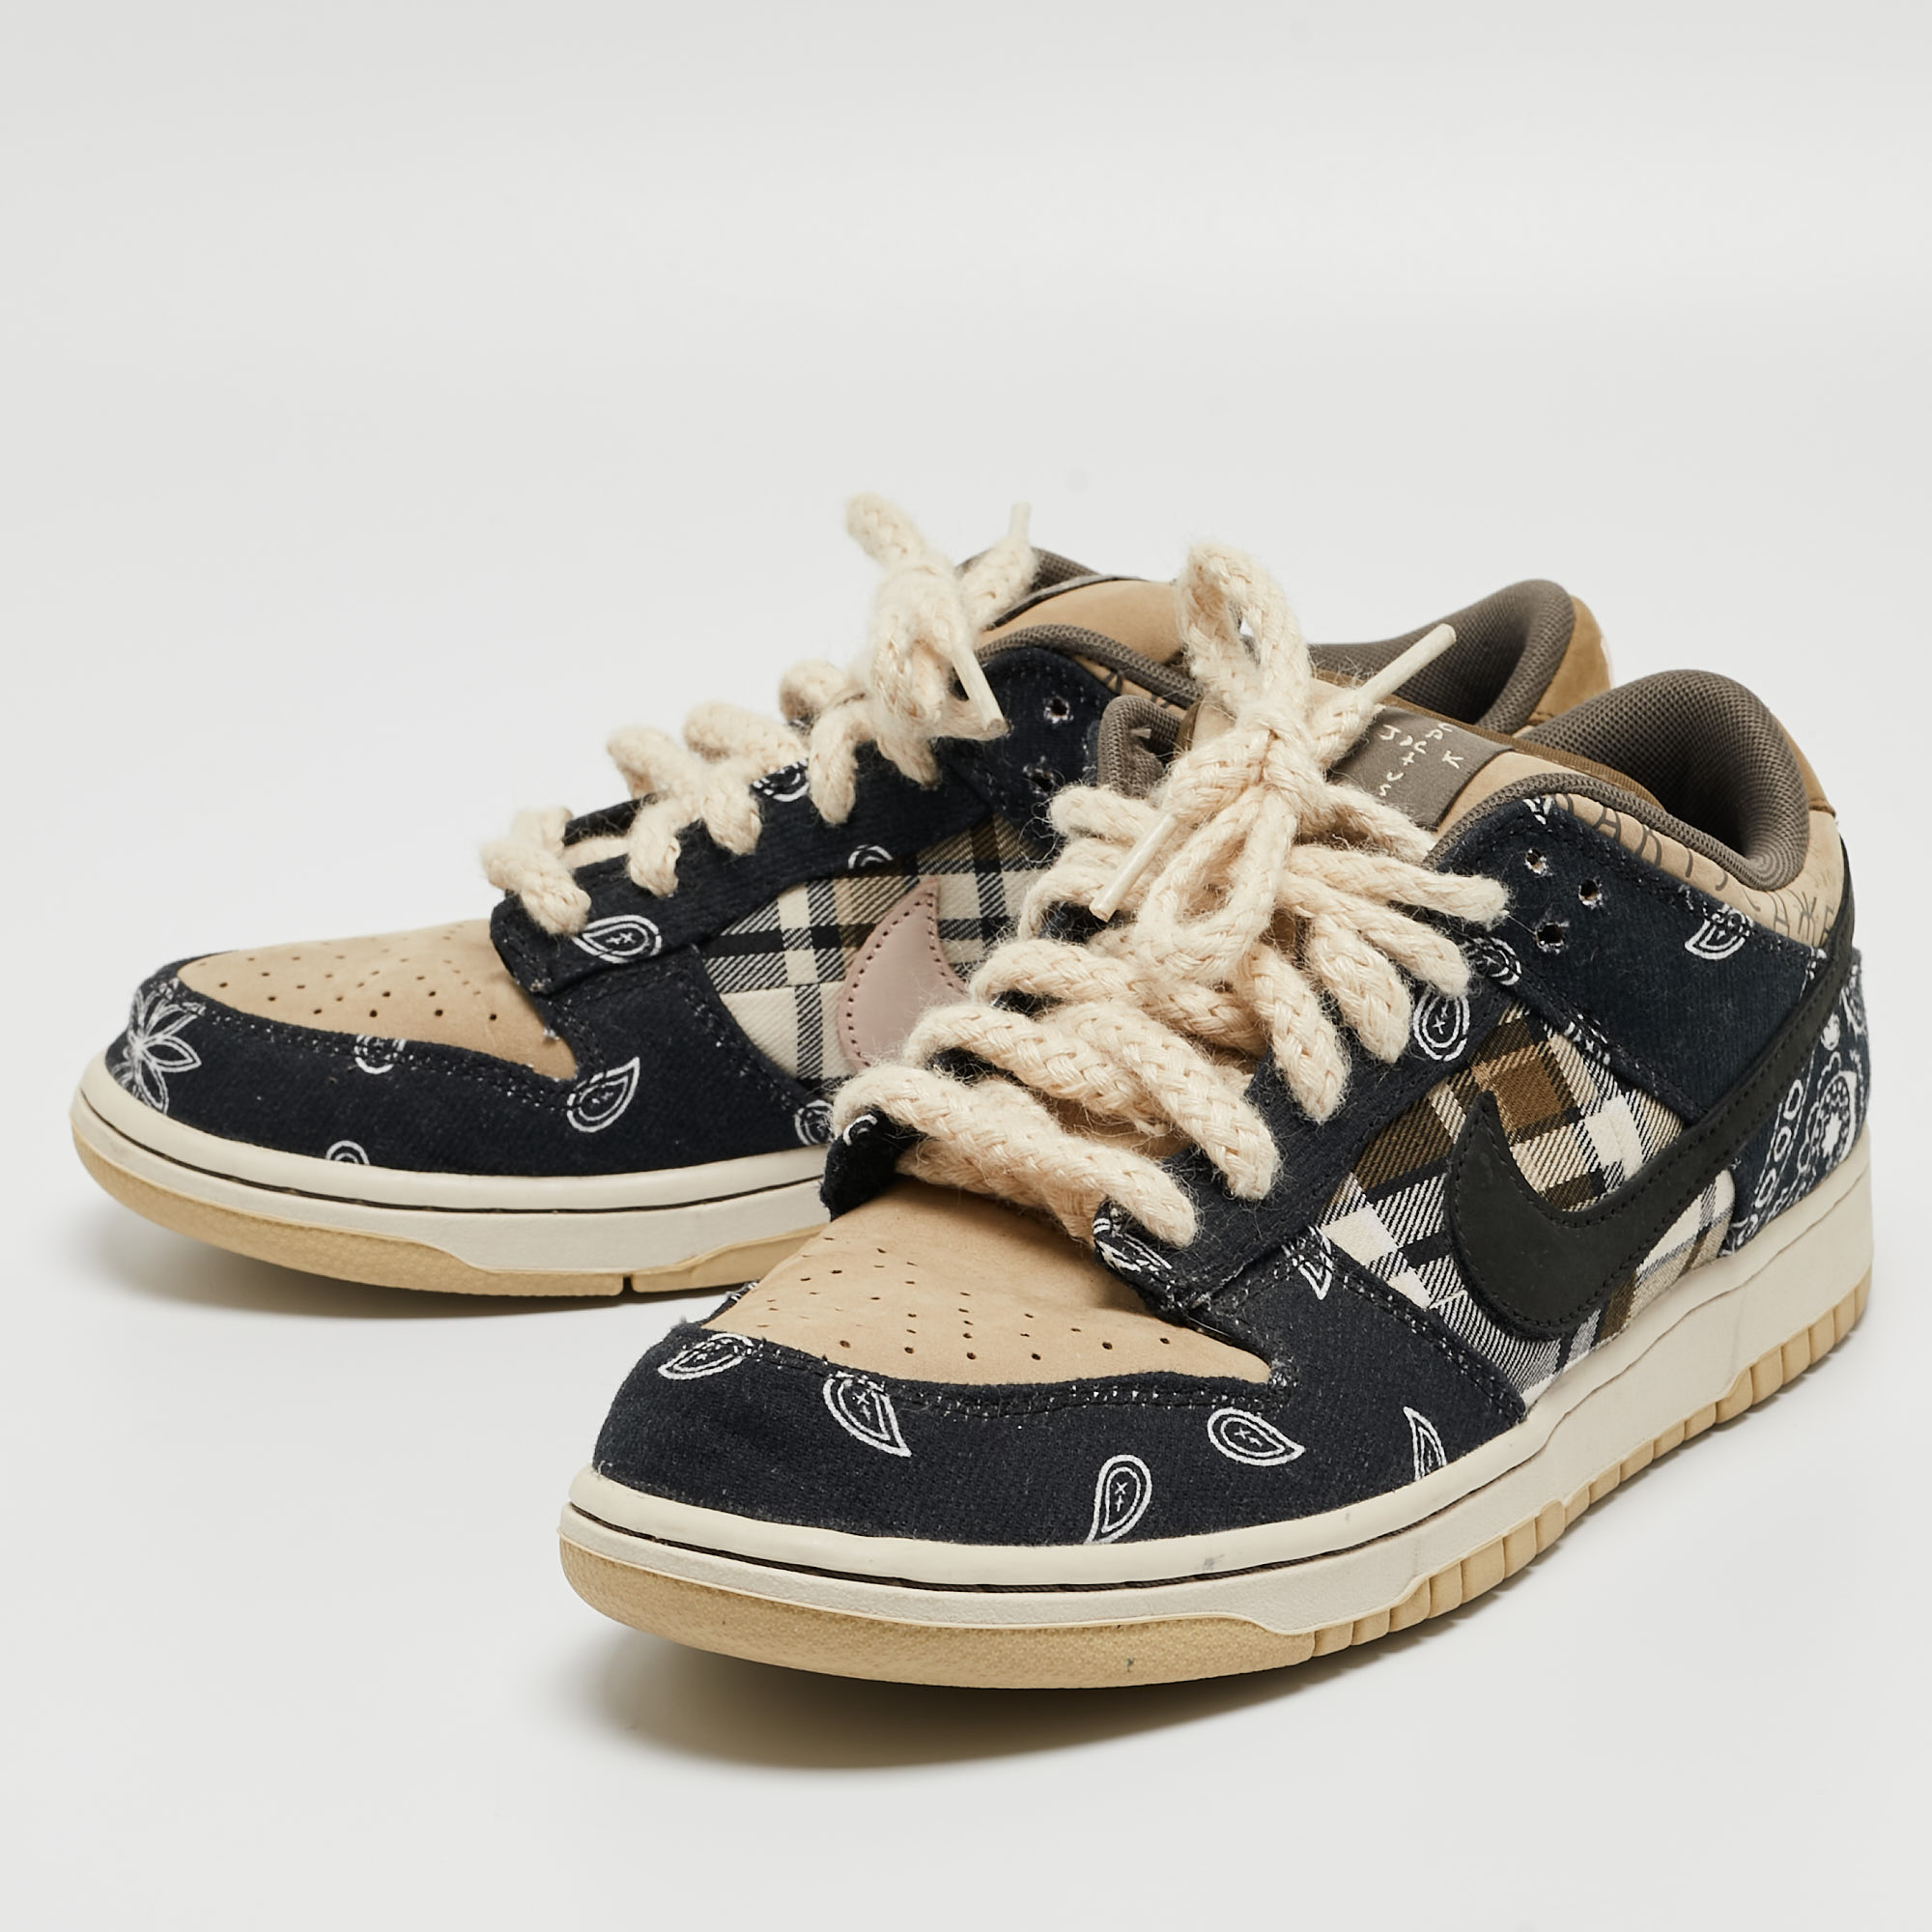 

Nike SB Beige/Blue Demin and Nubuck Leather Dunk Low Top Sneakers Size